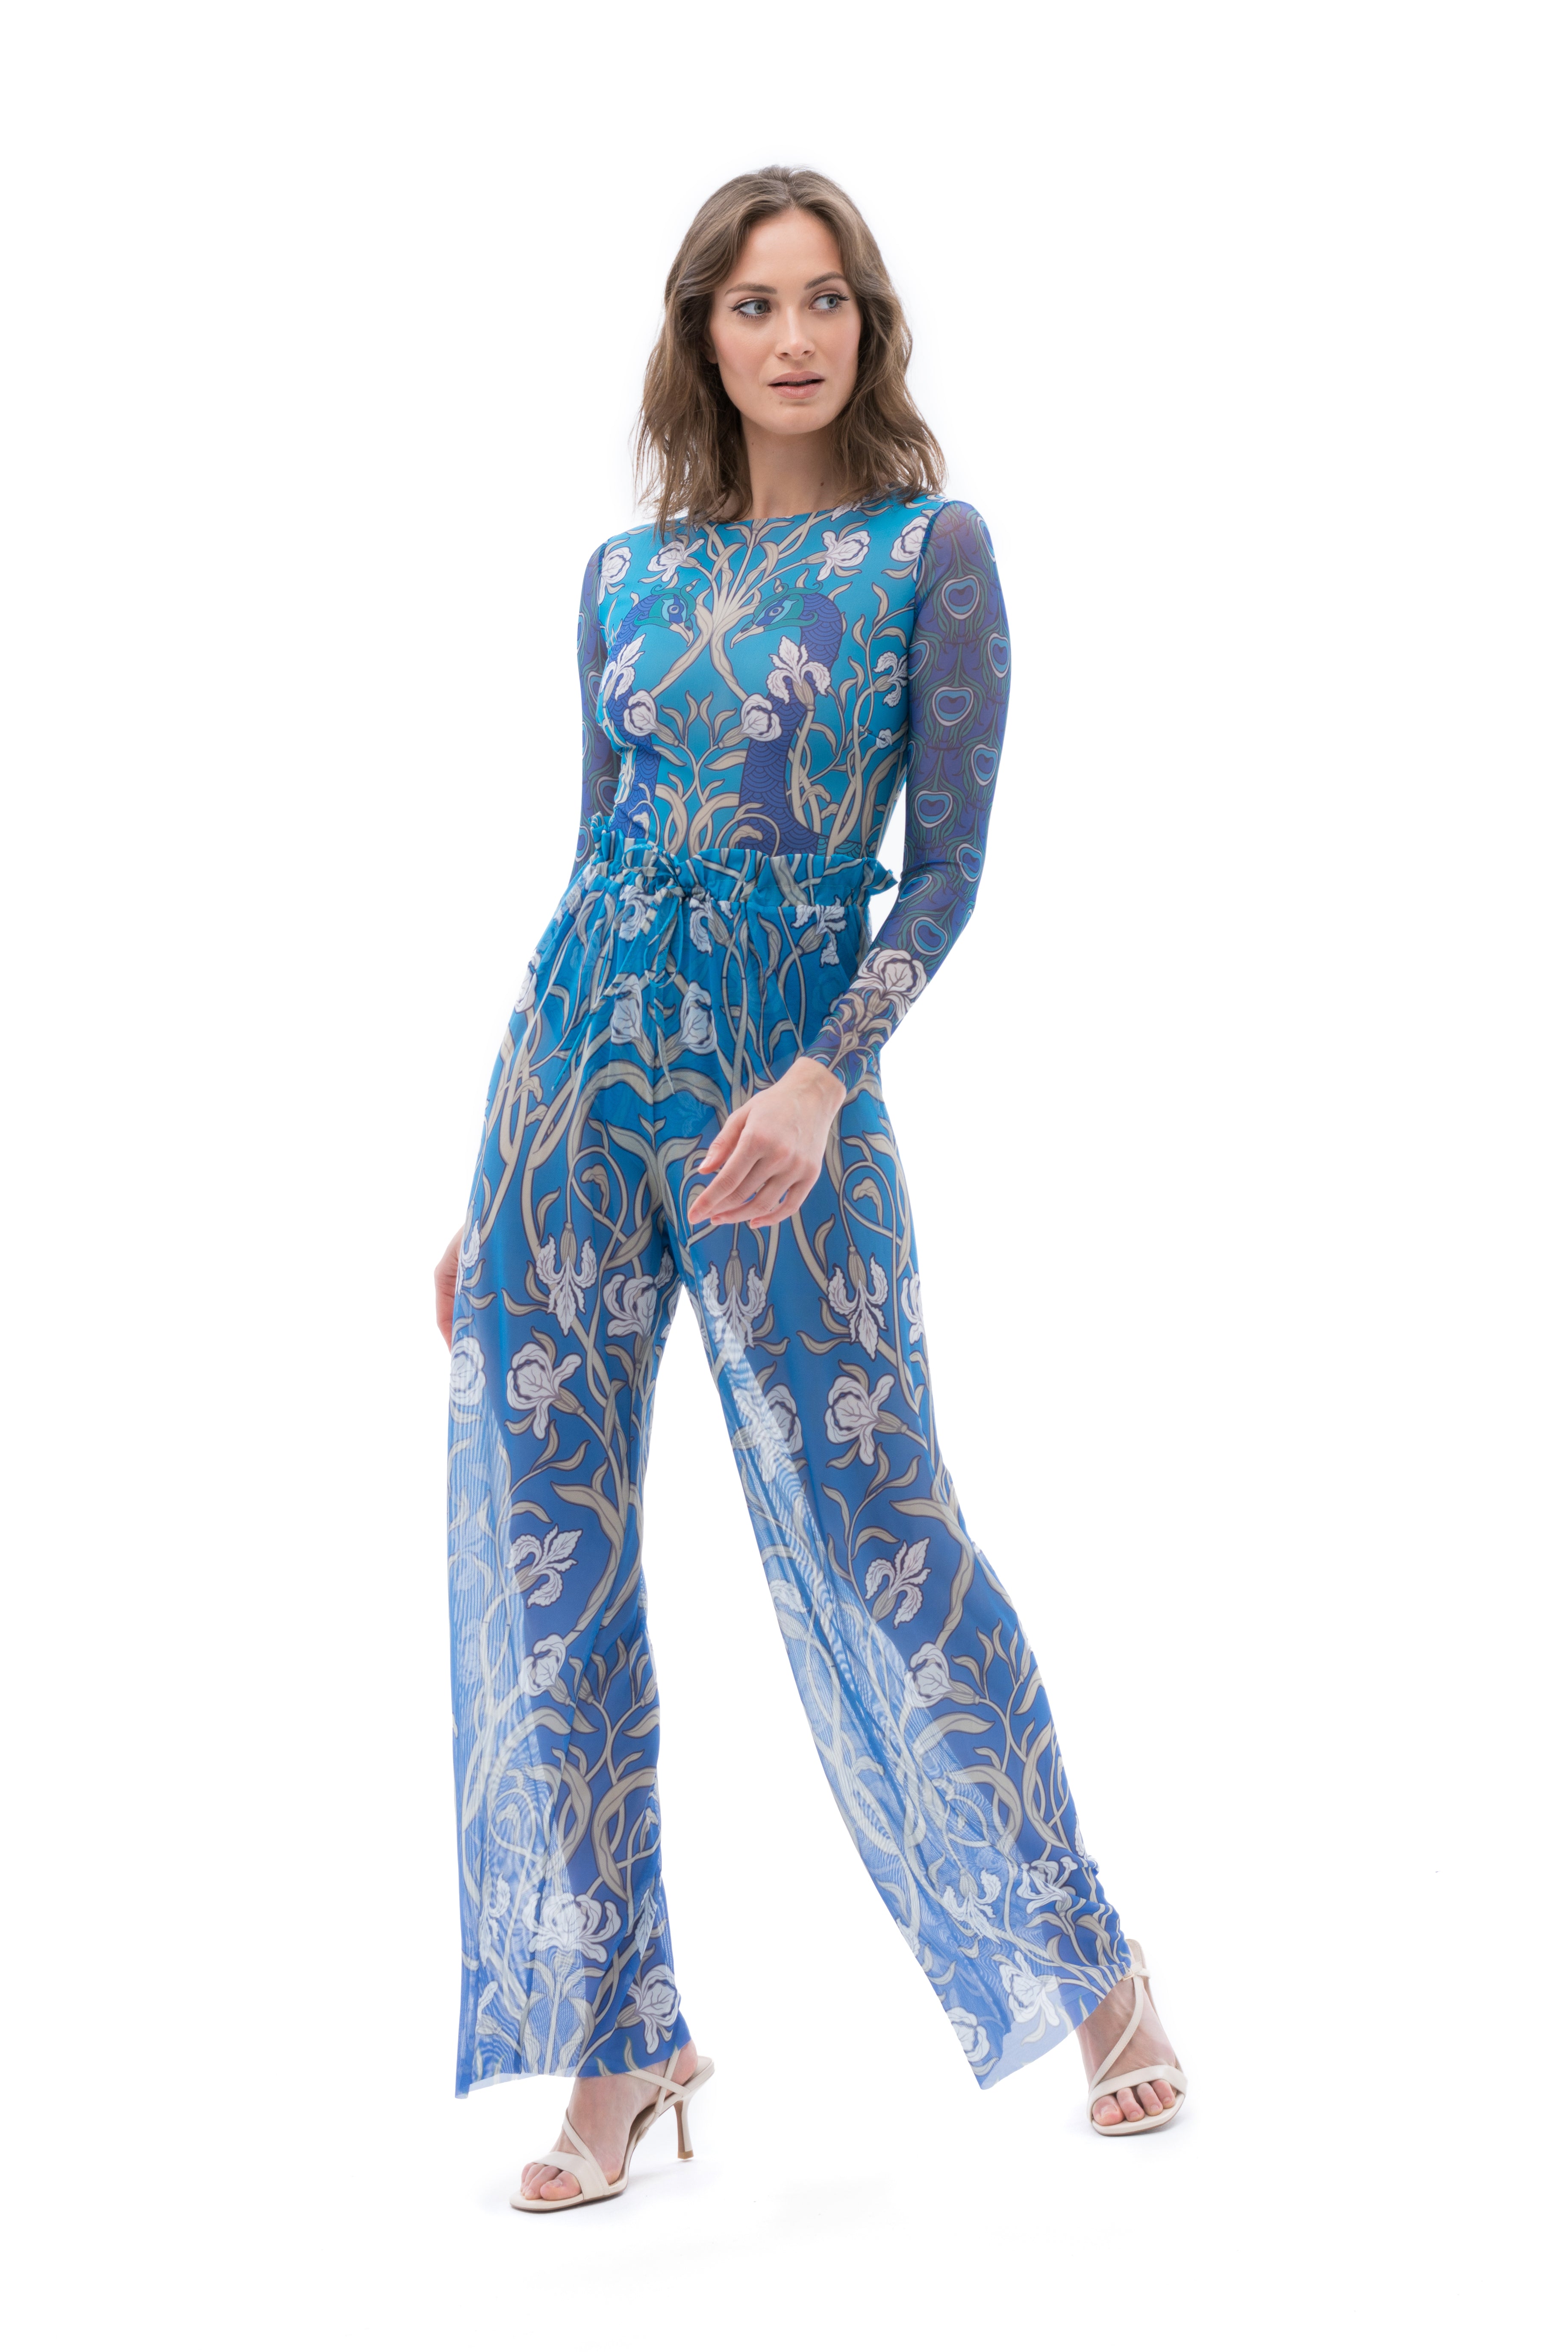 Explore our range of sustainable tan-through smart swimsuits featuring a mesmerizing peacock print. This file highlights beach pants, offering classic luxury for your beach outings.